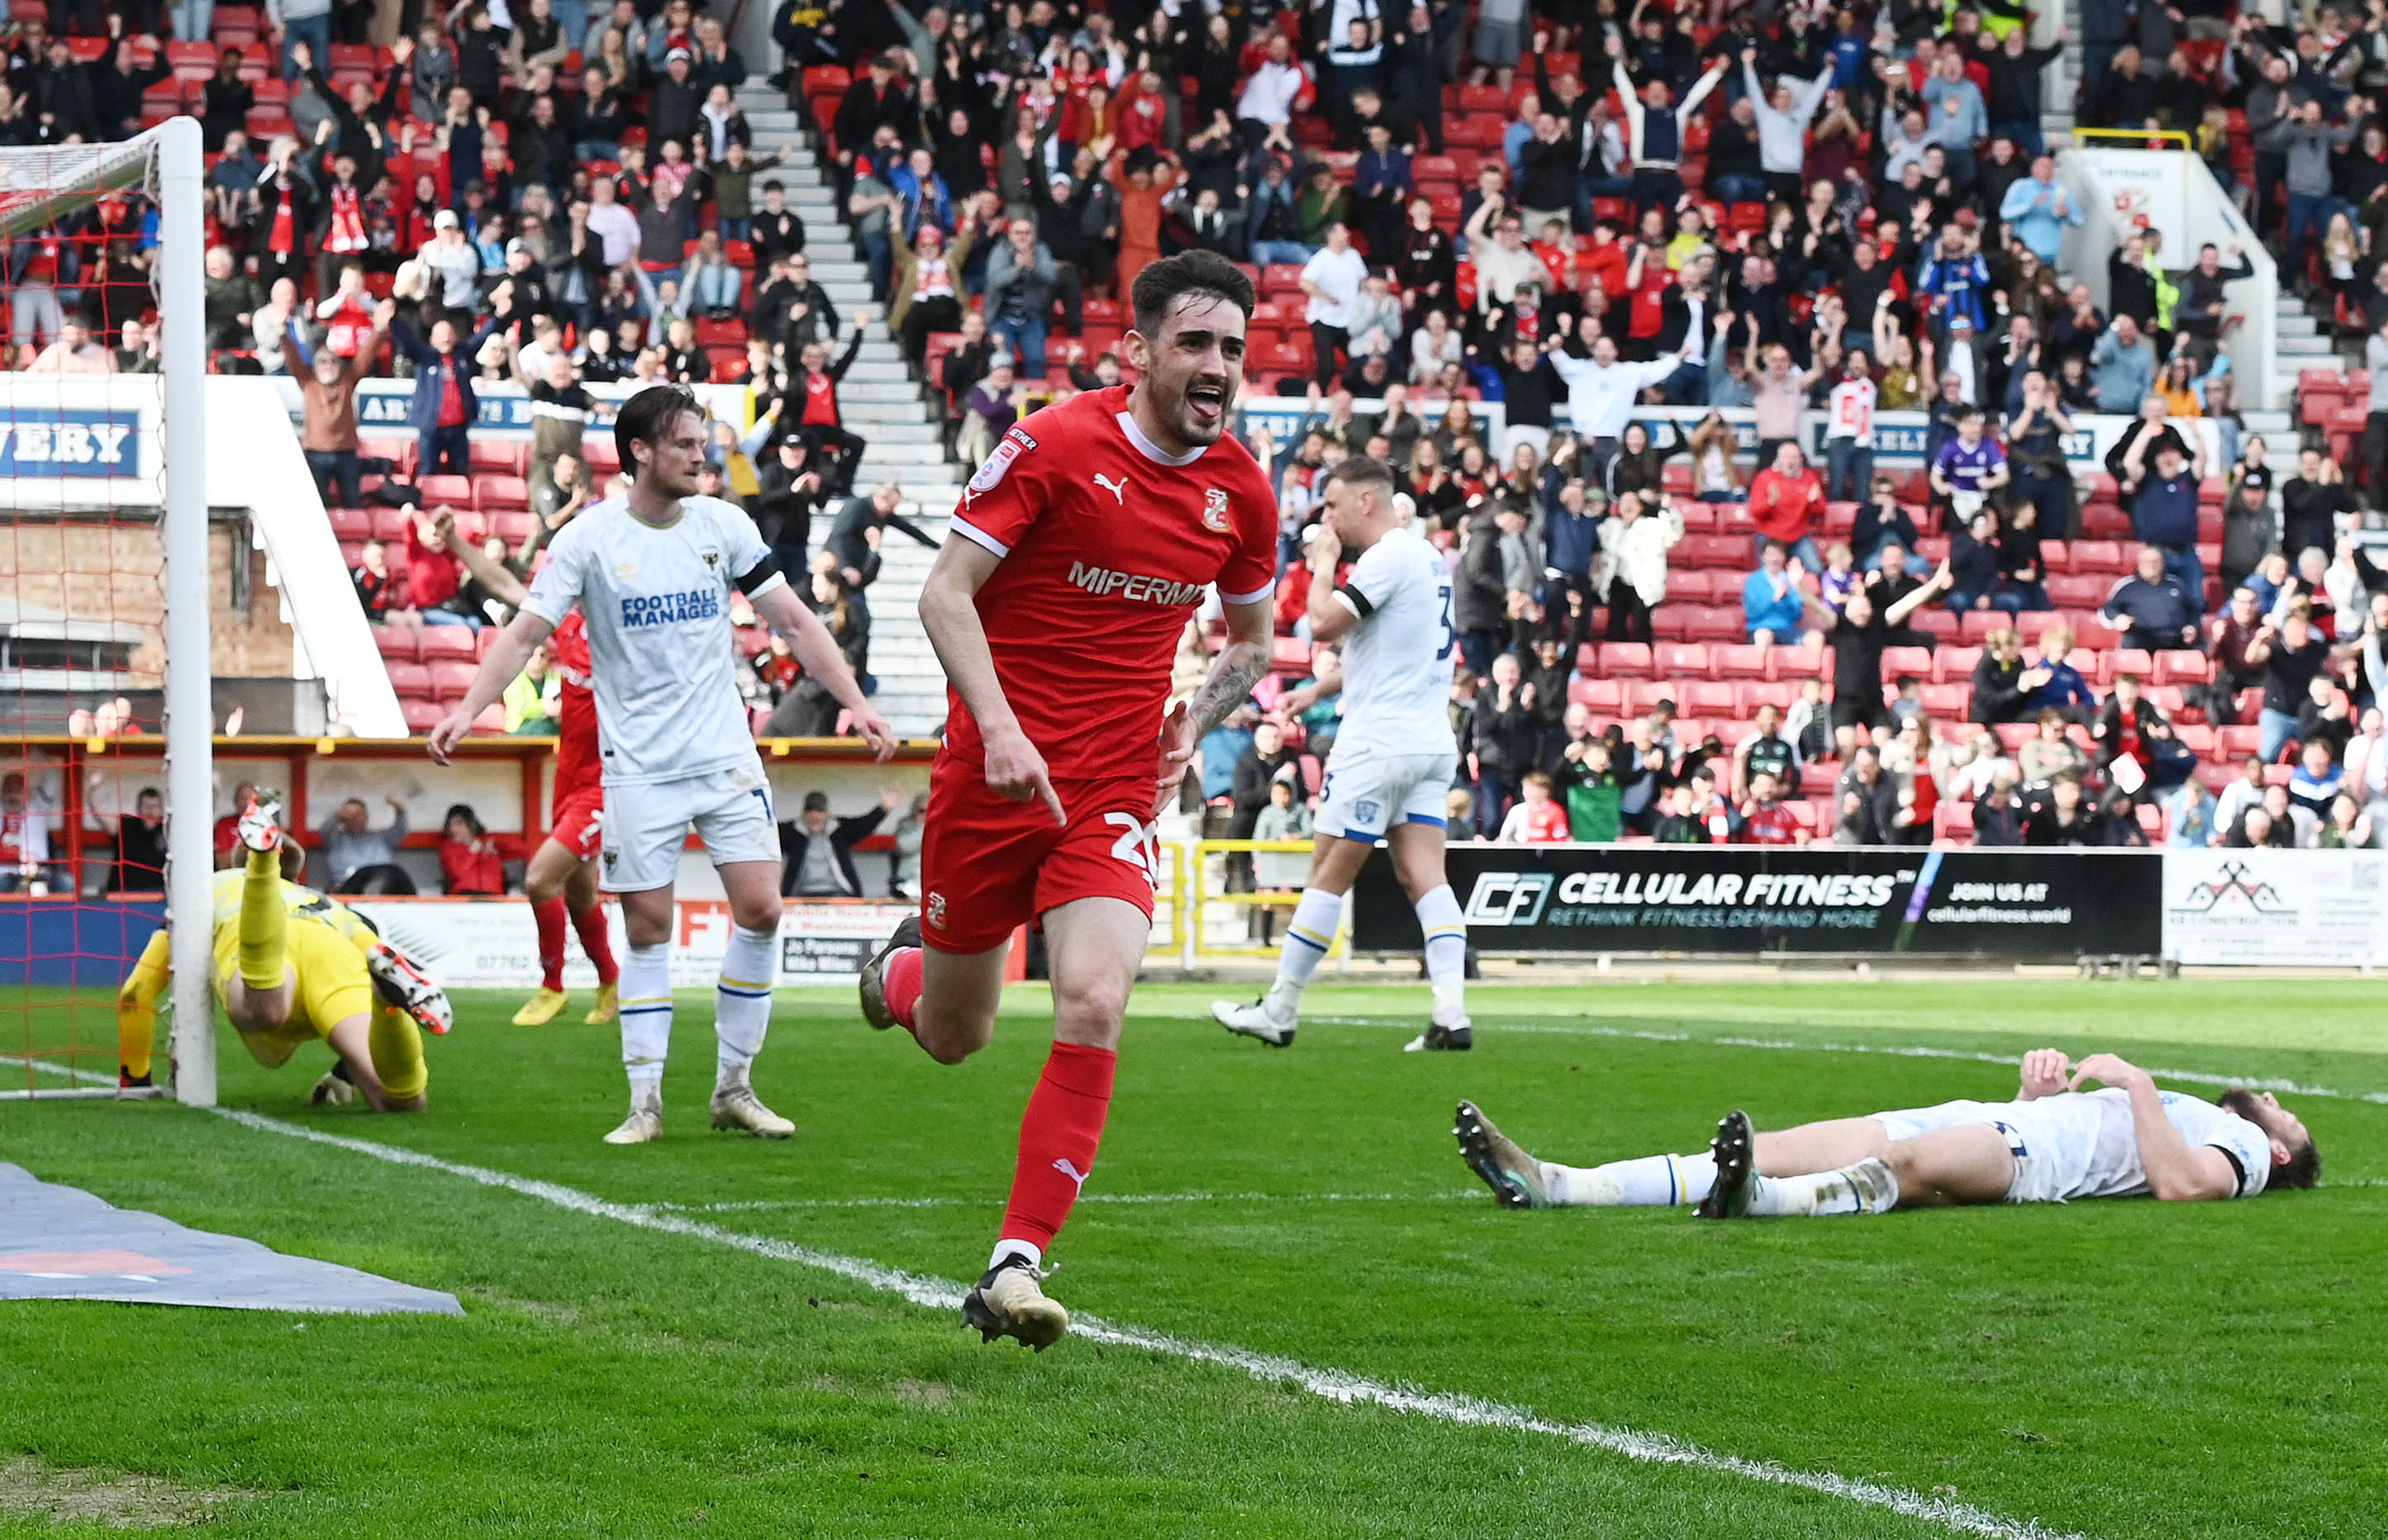 Devoy admits he's not sure about his future after striking twice for Swindon